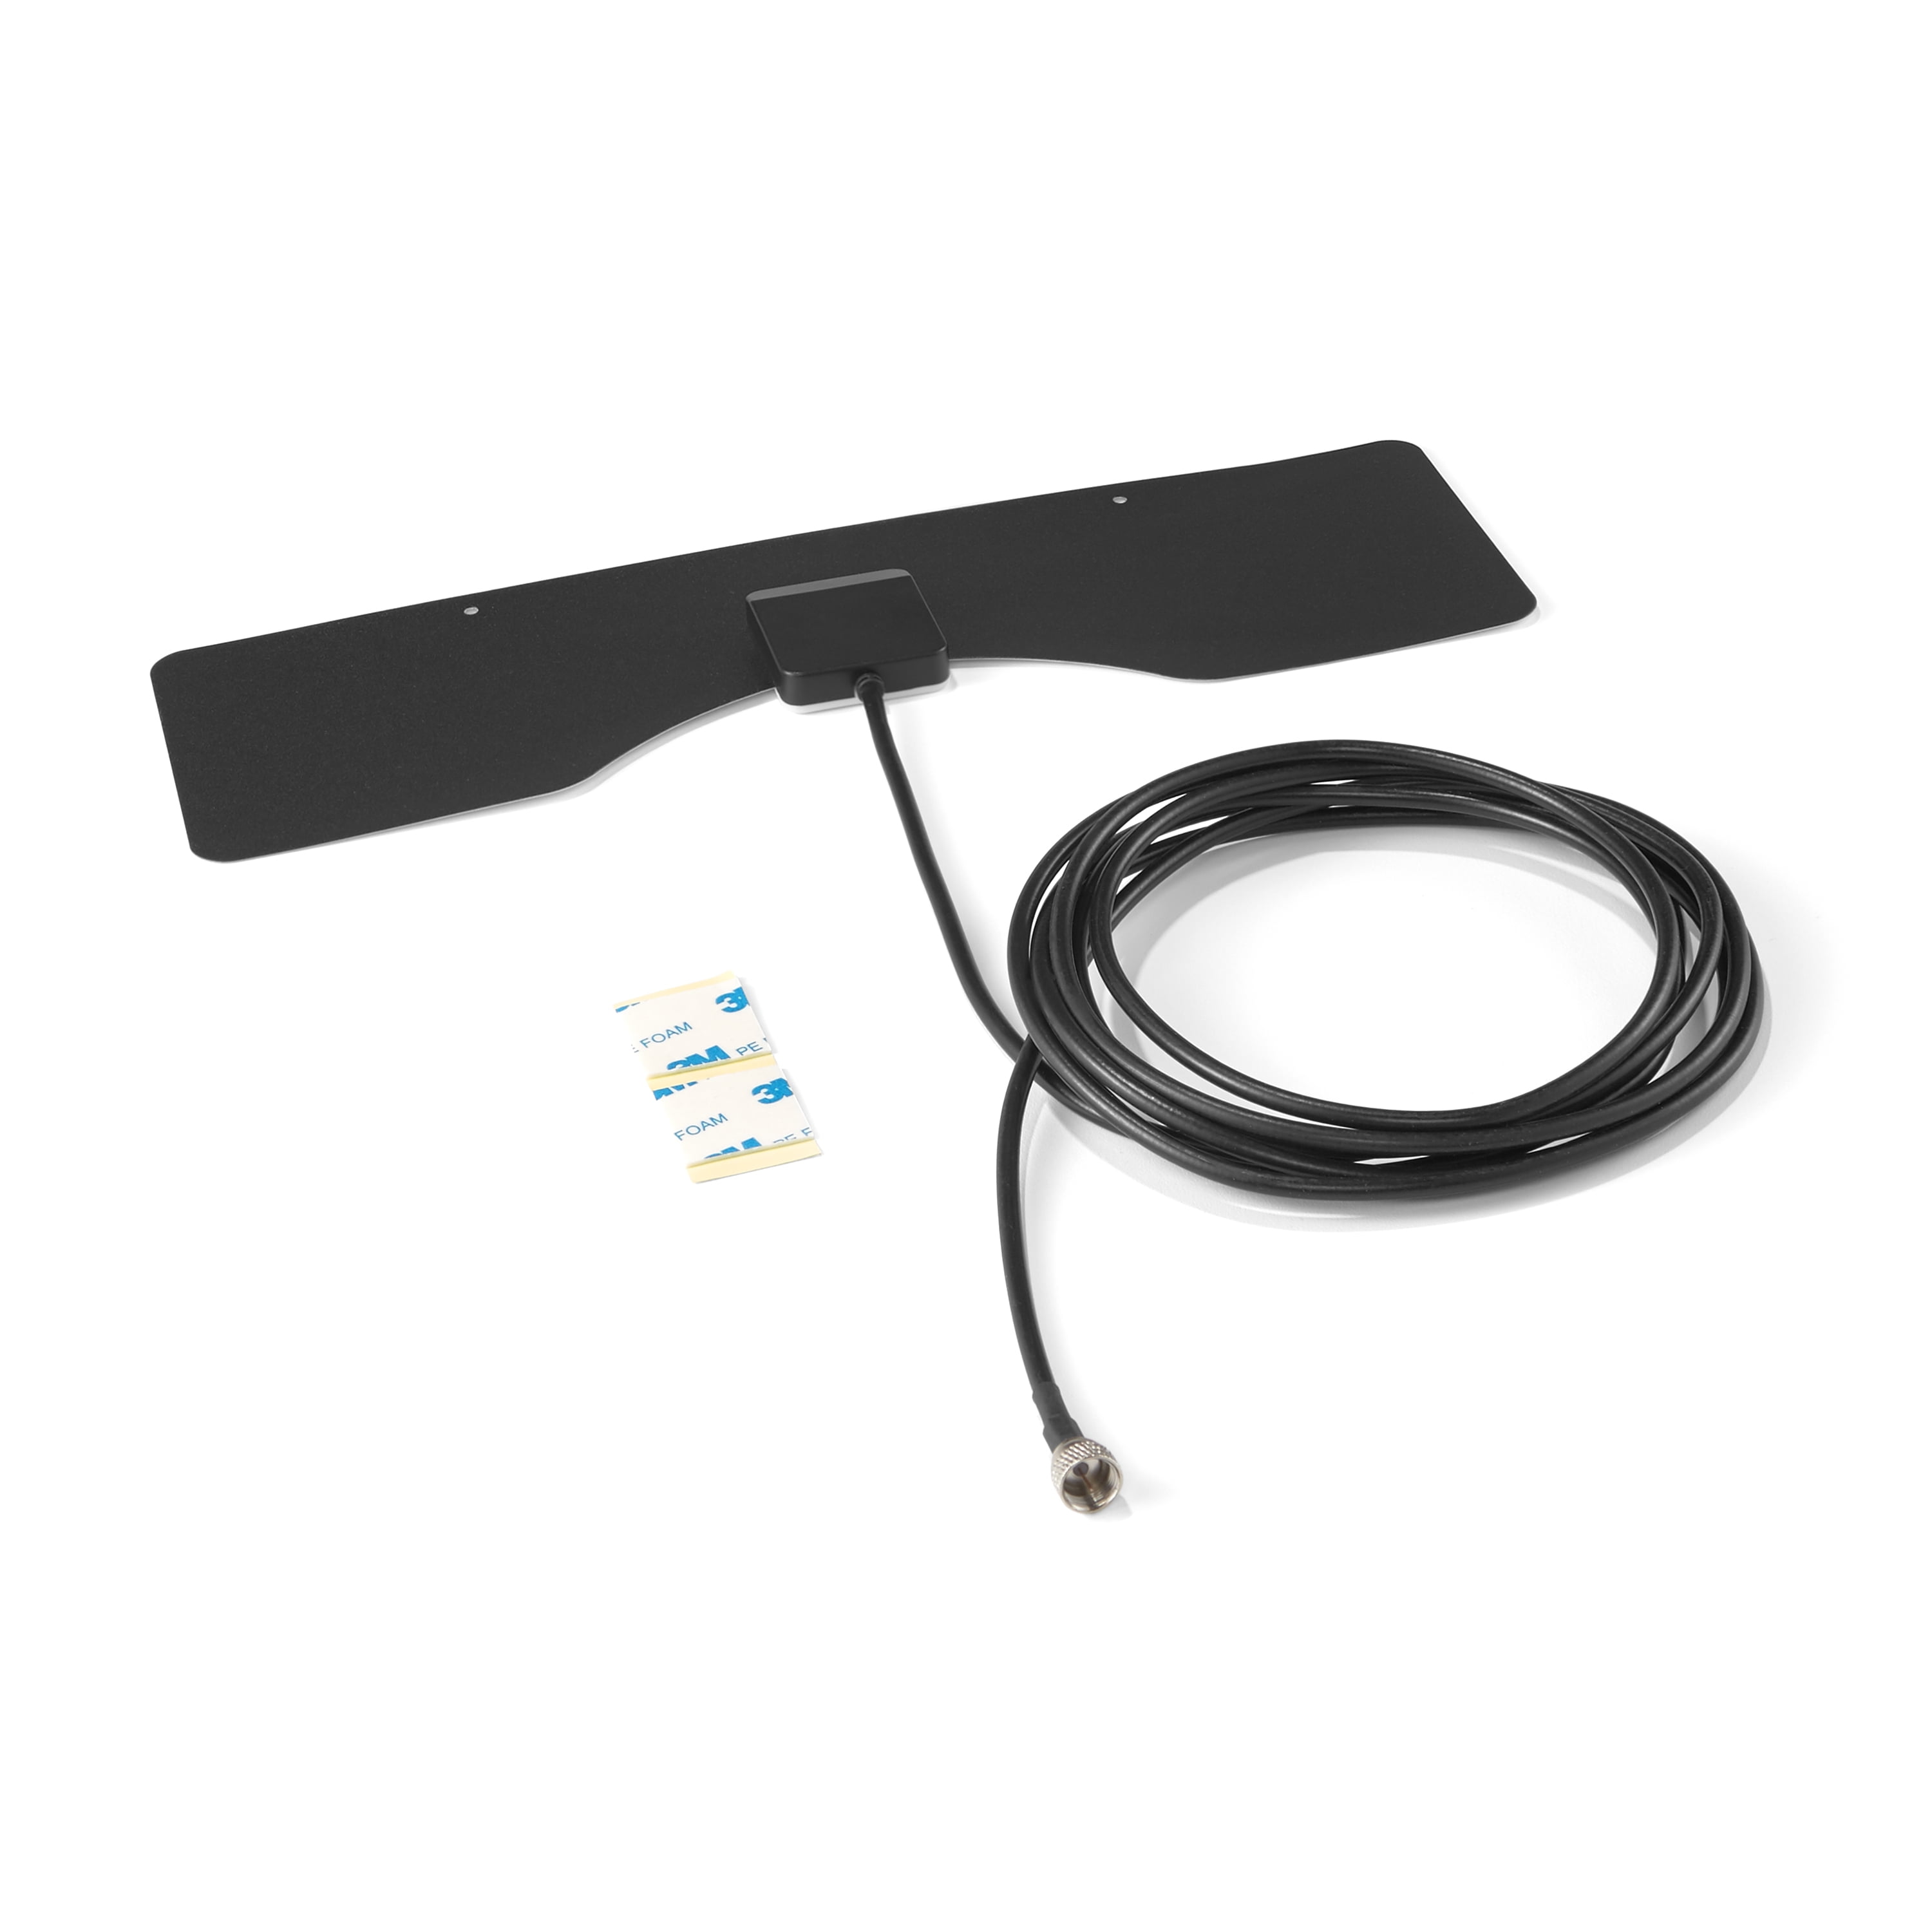 onn. Indoor Ultra-Thin High Definition Antenna with 25 mile Reception Range and 10-ft Coax Cable for Easy Placement.